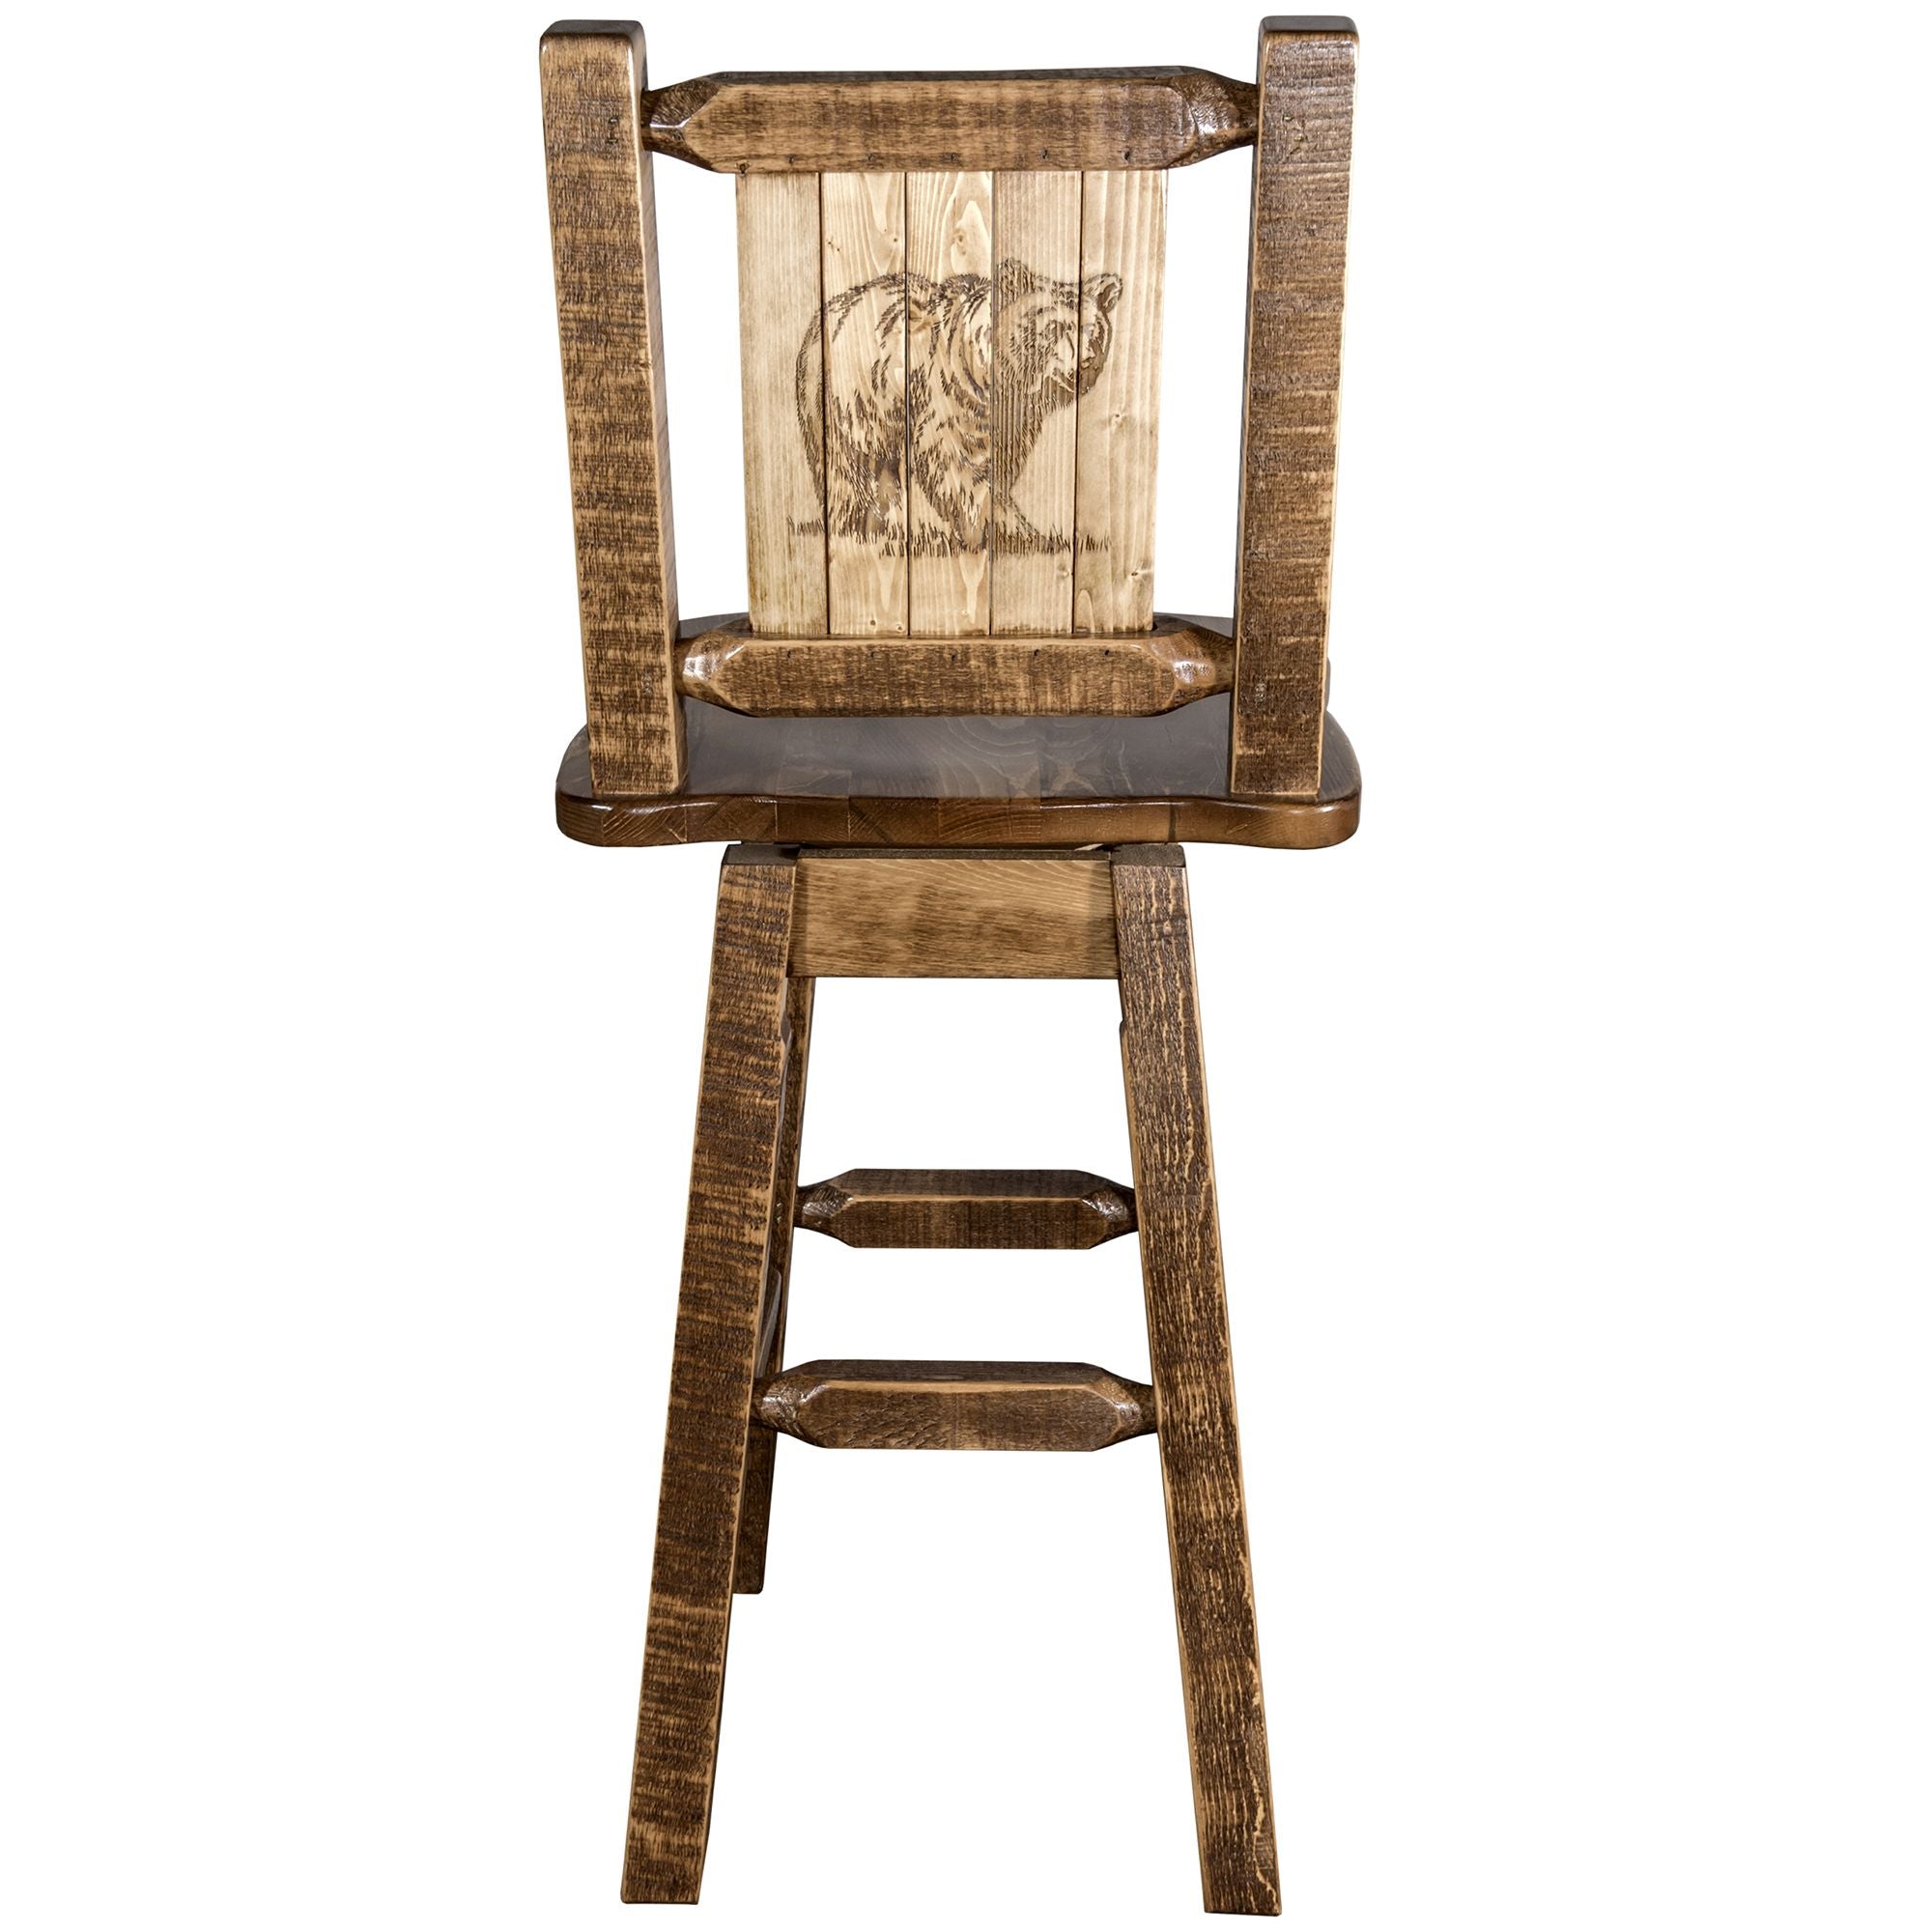 montana woodworks homestead collection-barstool with back swivel and laser engraved bear design stain lacquer finish mwhcbswsnrsllzbear back